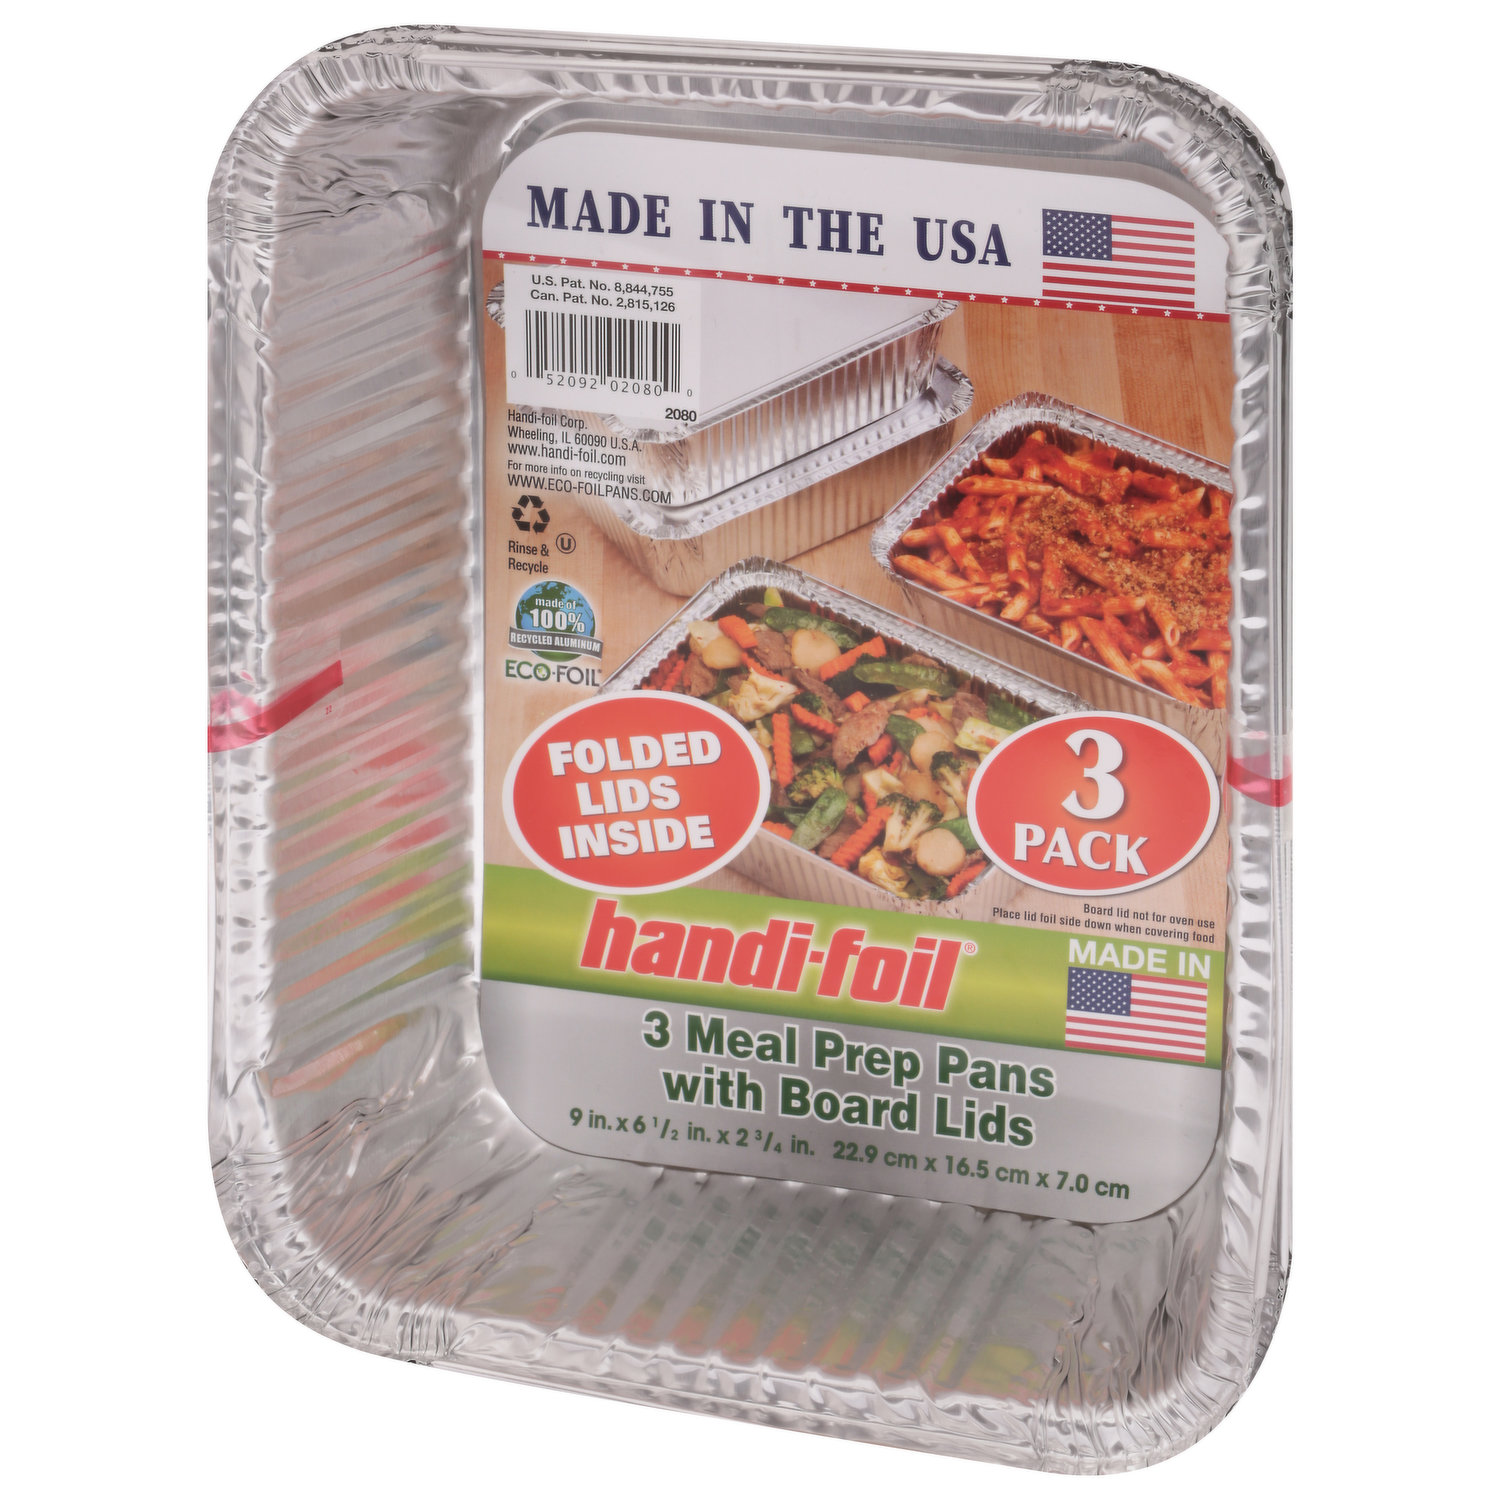 Save on Handi-Foil Giant Meal Prep Pans with Board Lids Order Online  Delivery